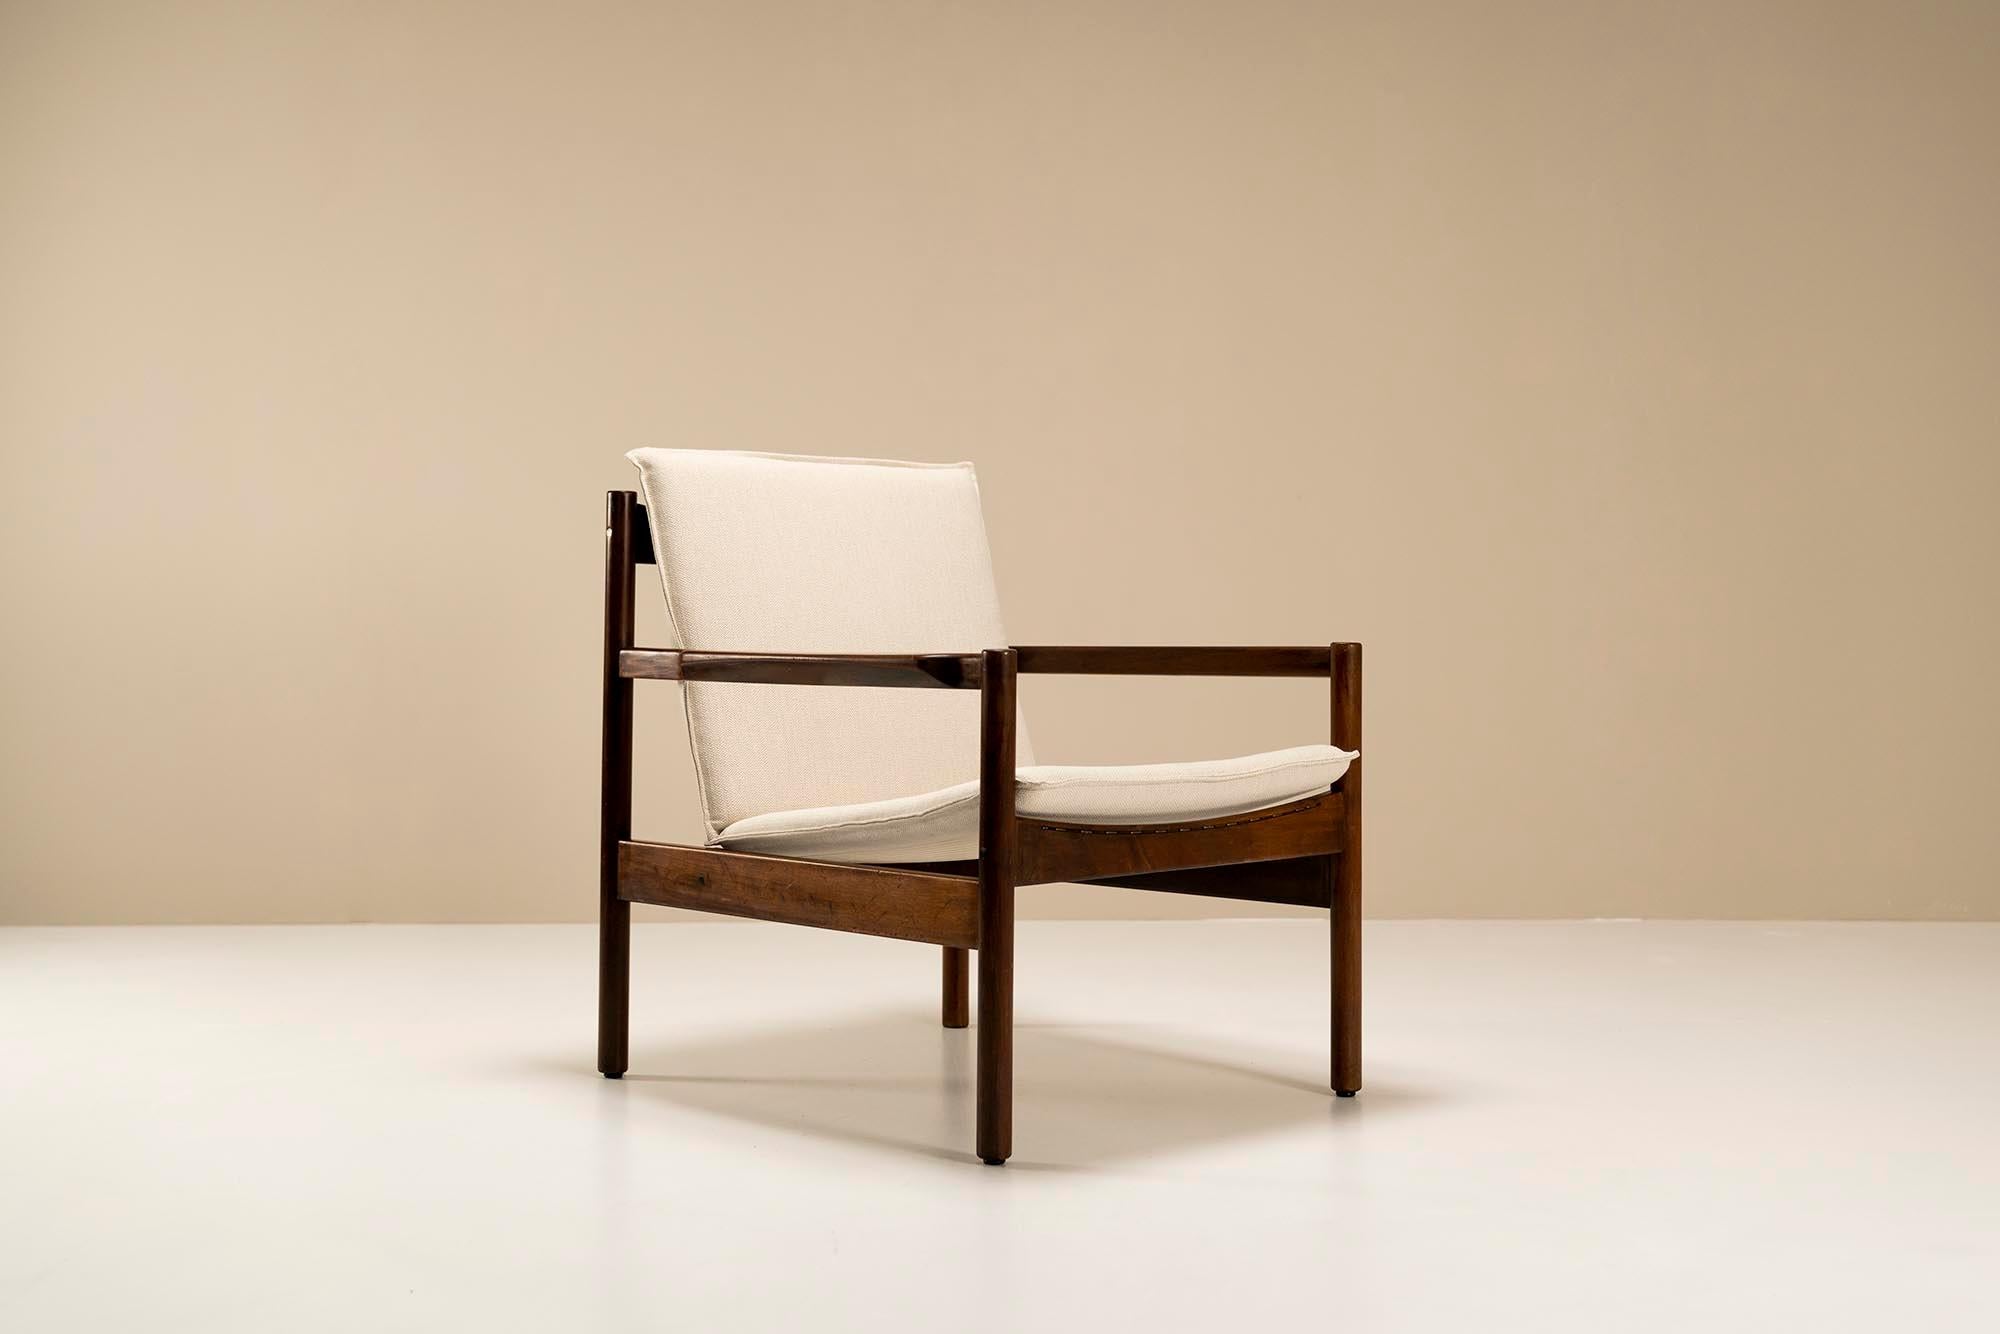 Brazilian Michel Arnoult Ouro Preto Lounge Chair in Imbuia Wood with Ottoman, Brasil 1958